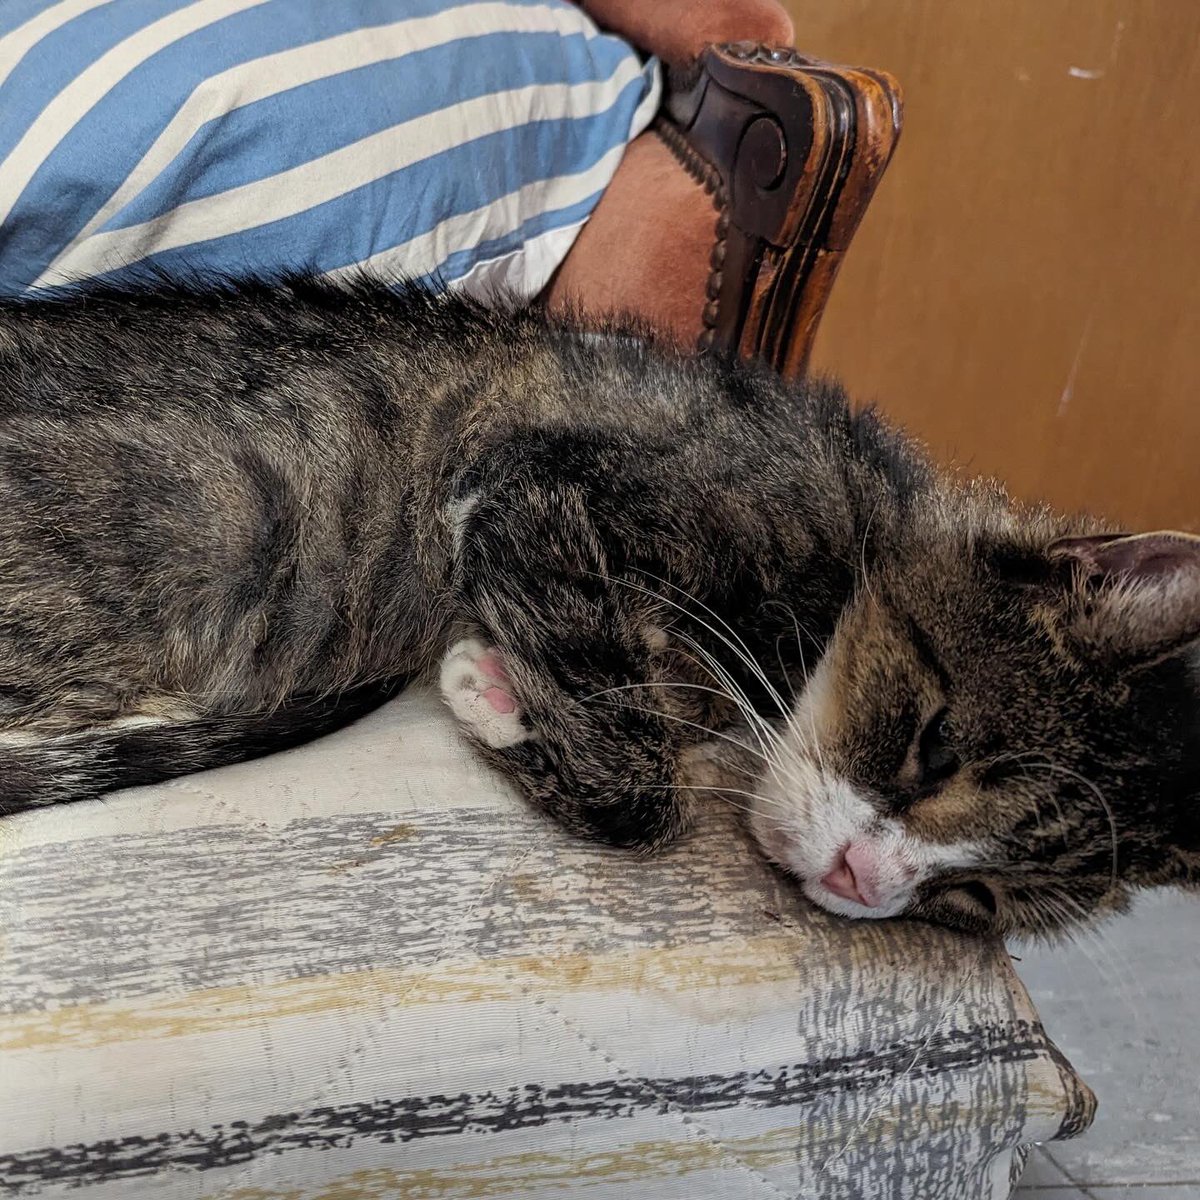 We’re ‼️urgently‼️ looking for either a foster or permanent home for Johnny (aged 18-20 years old). Johnny is looking for a warm and safe place (indoor is fine), love and food. Ideally it would be in a home with no other pets. Please email us at admin@felinefriendslondon.uk 🙏